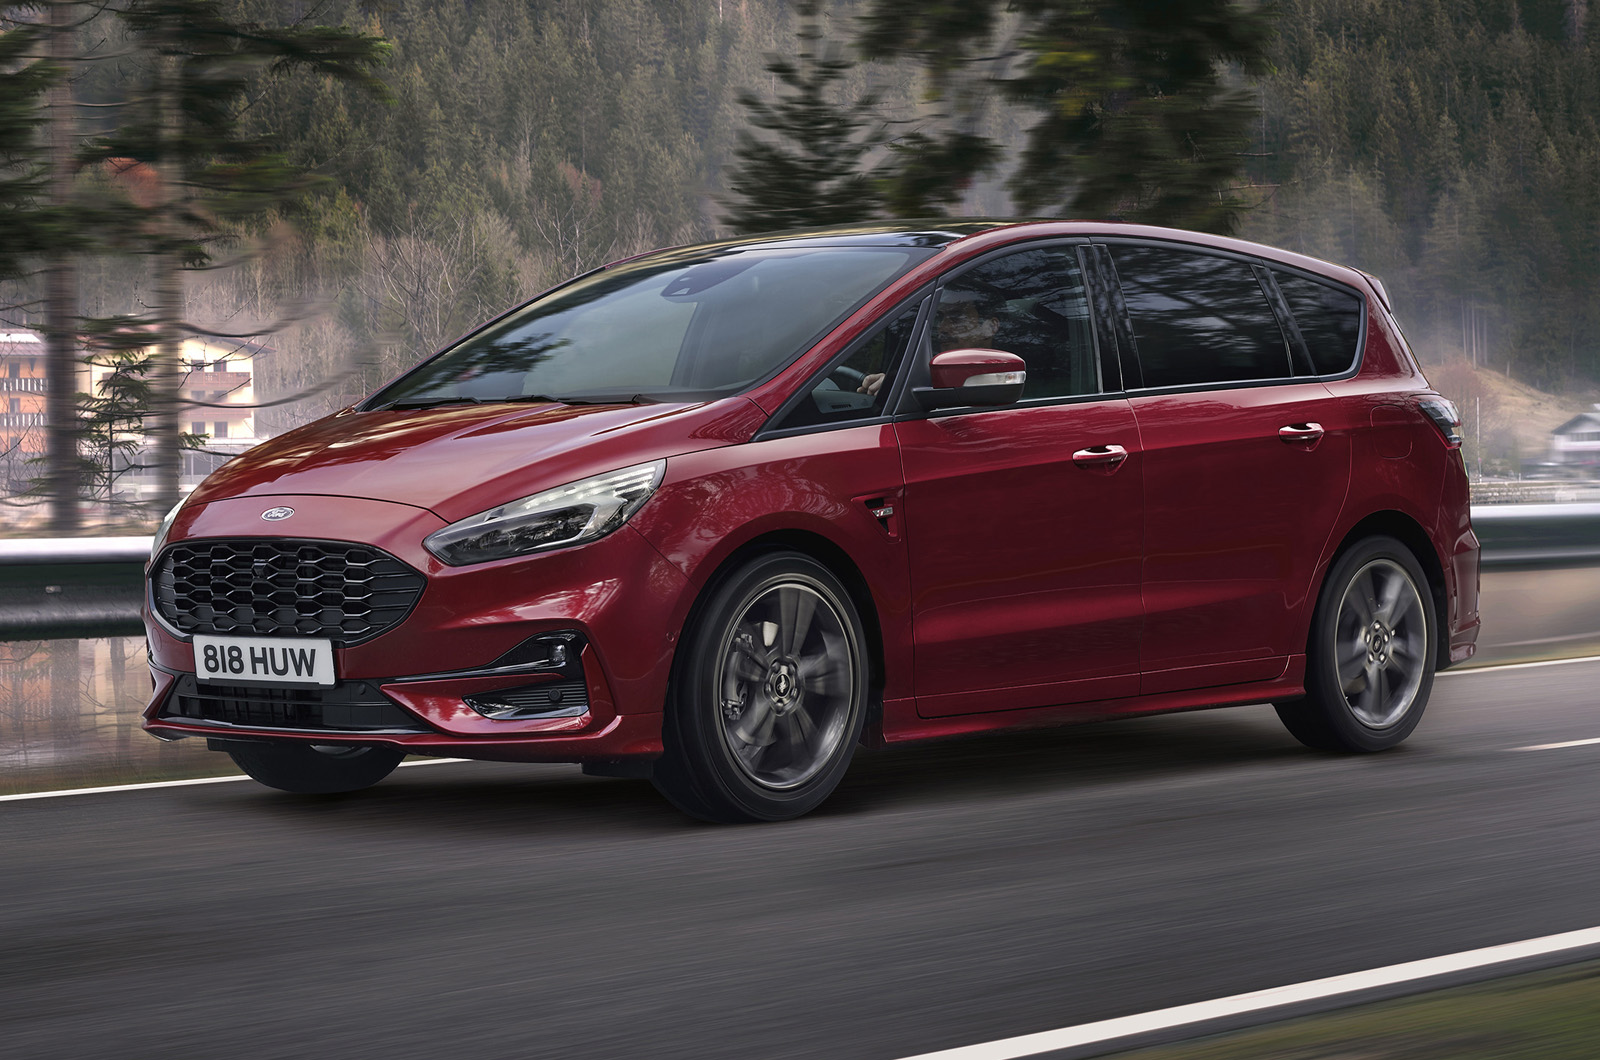 https://www.autocar.co.uk/sites/autocar.co.uk/files/images/car-reviews/first-drives/legacy/2021_ford_s-max_02.jpg